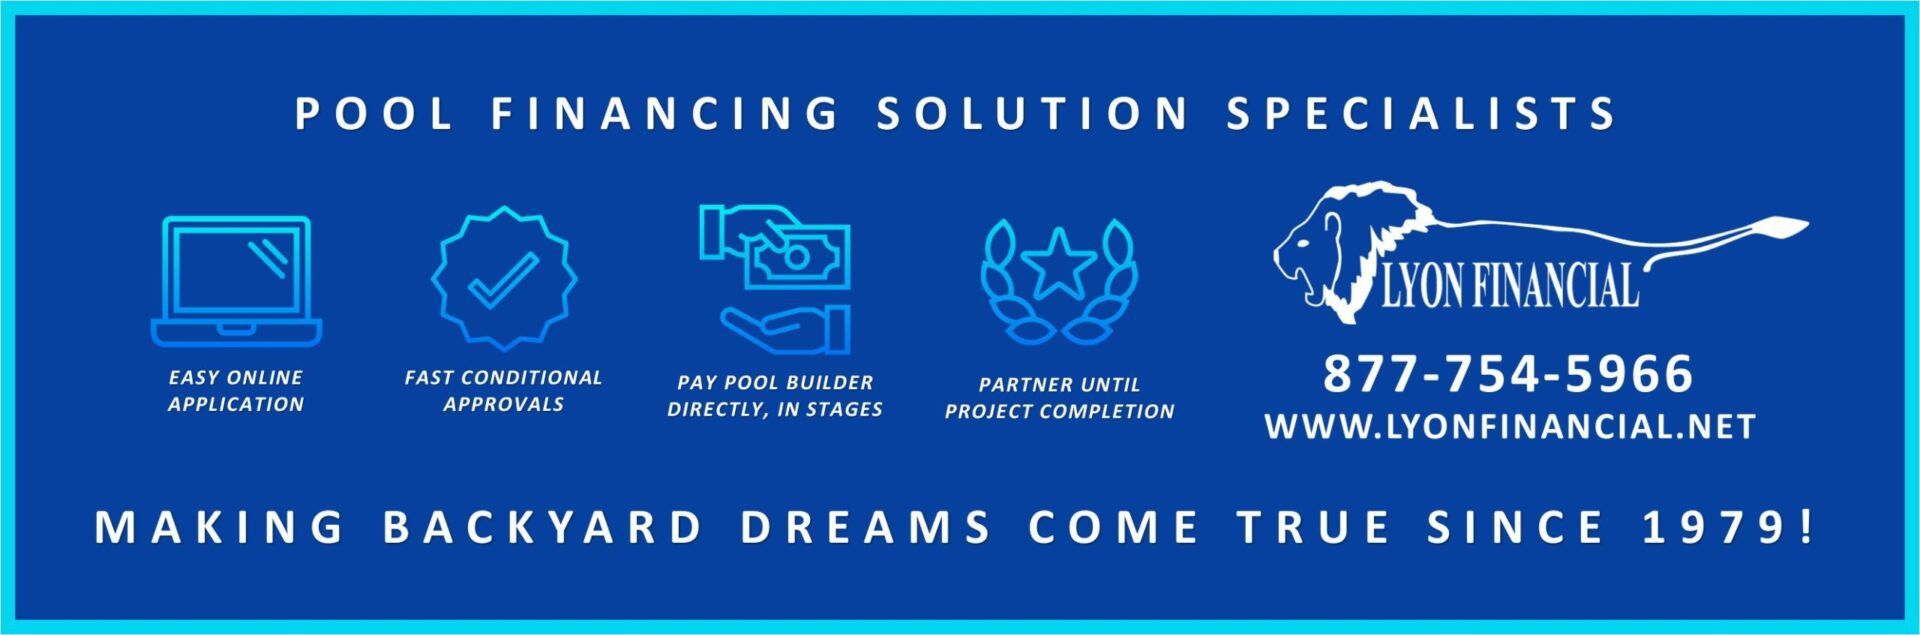 Pool Financing Solution Specialist